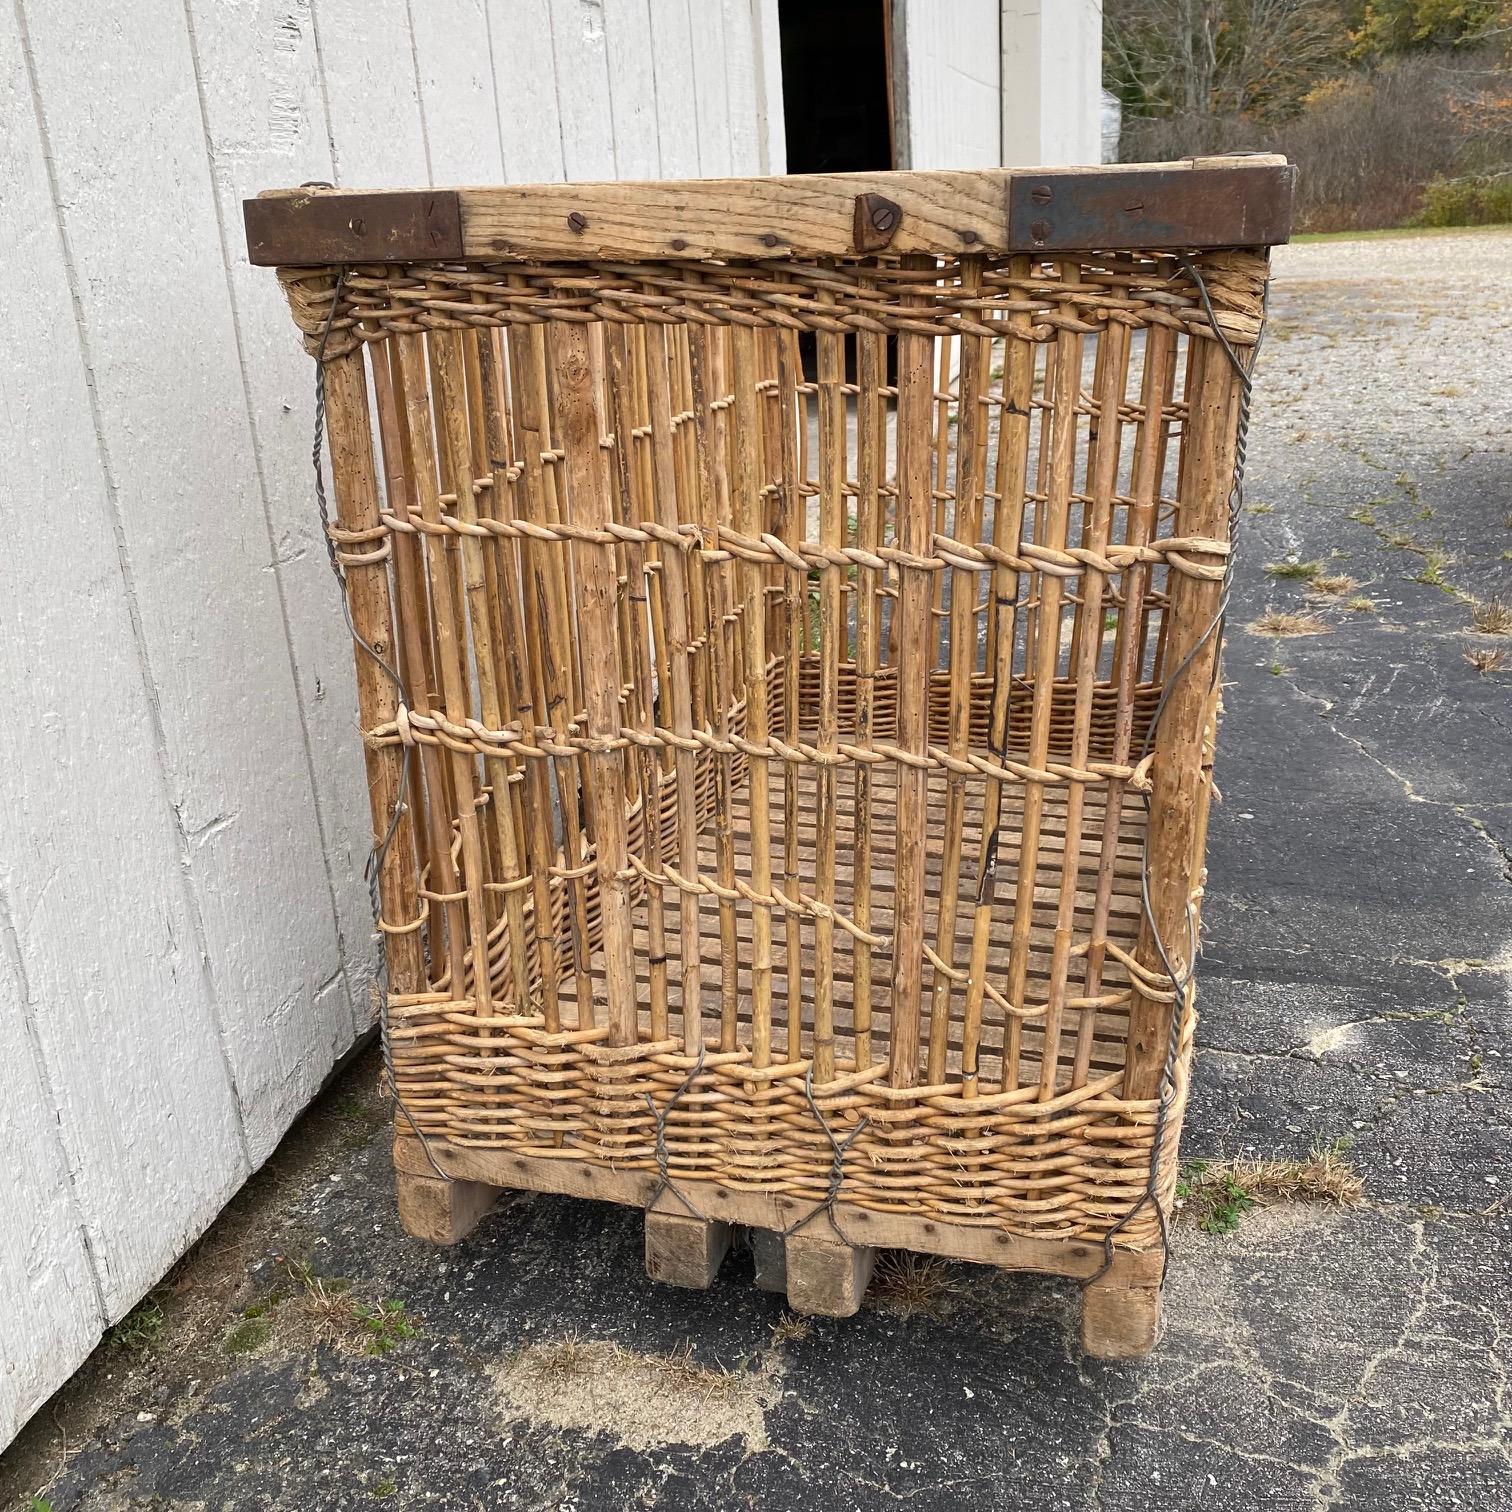  French Very Large Boulangerie or Bakery Industrial Woven Cart Basket on Wheels 1